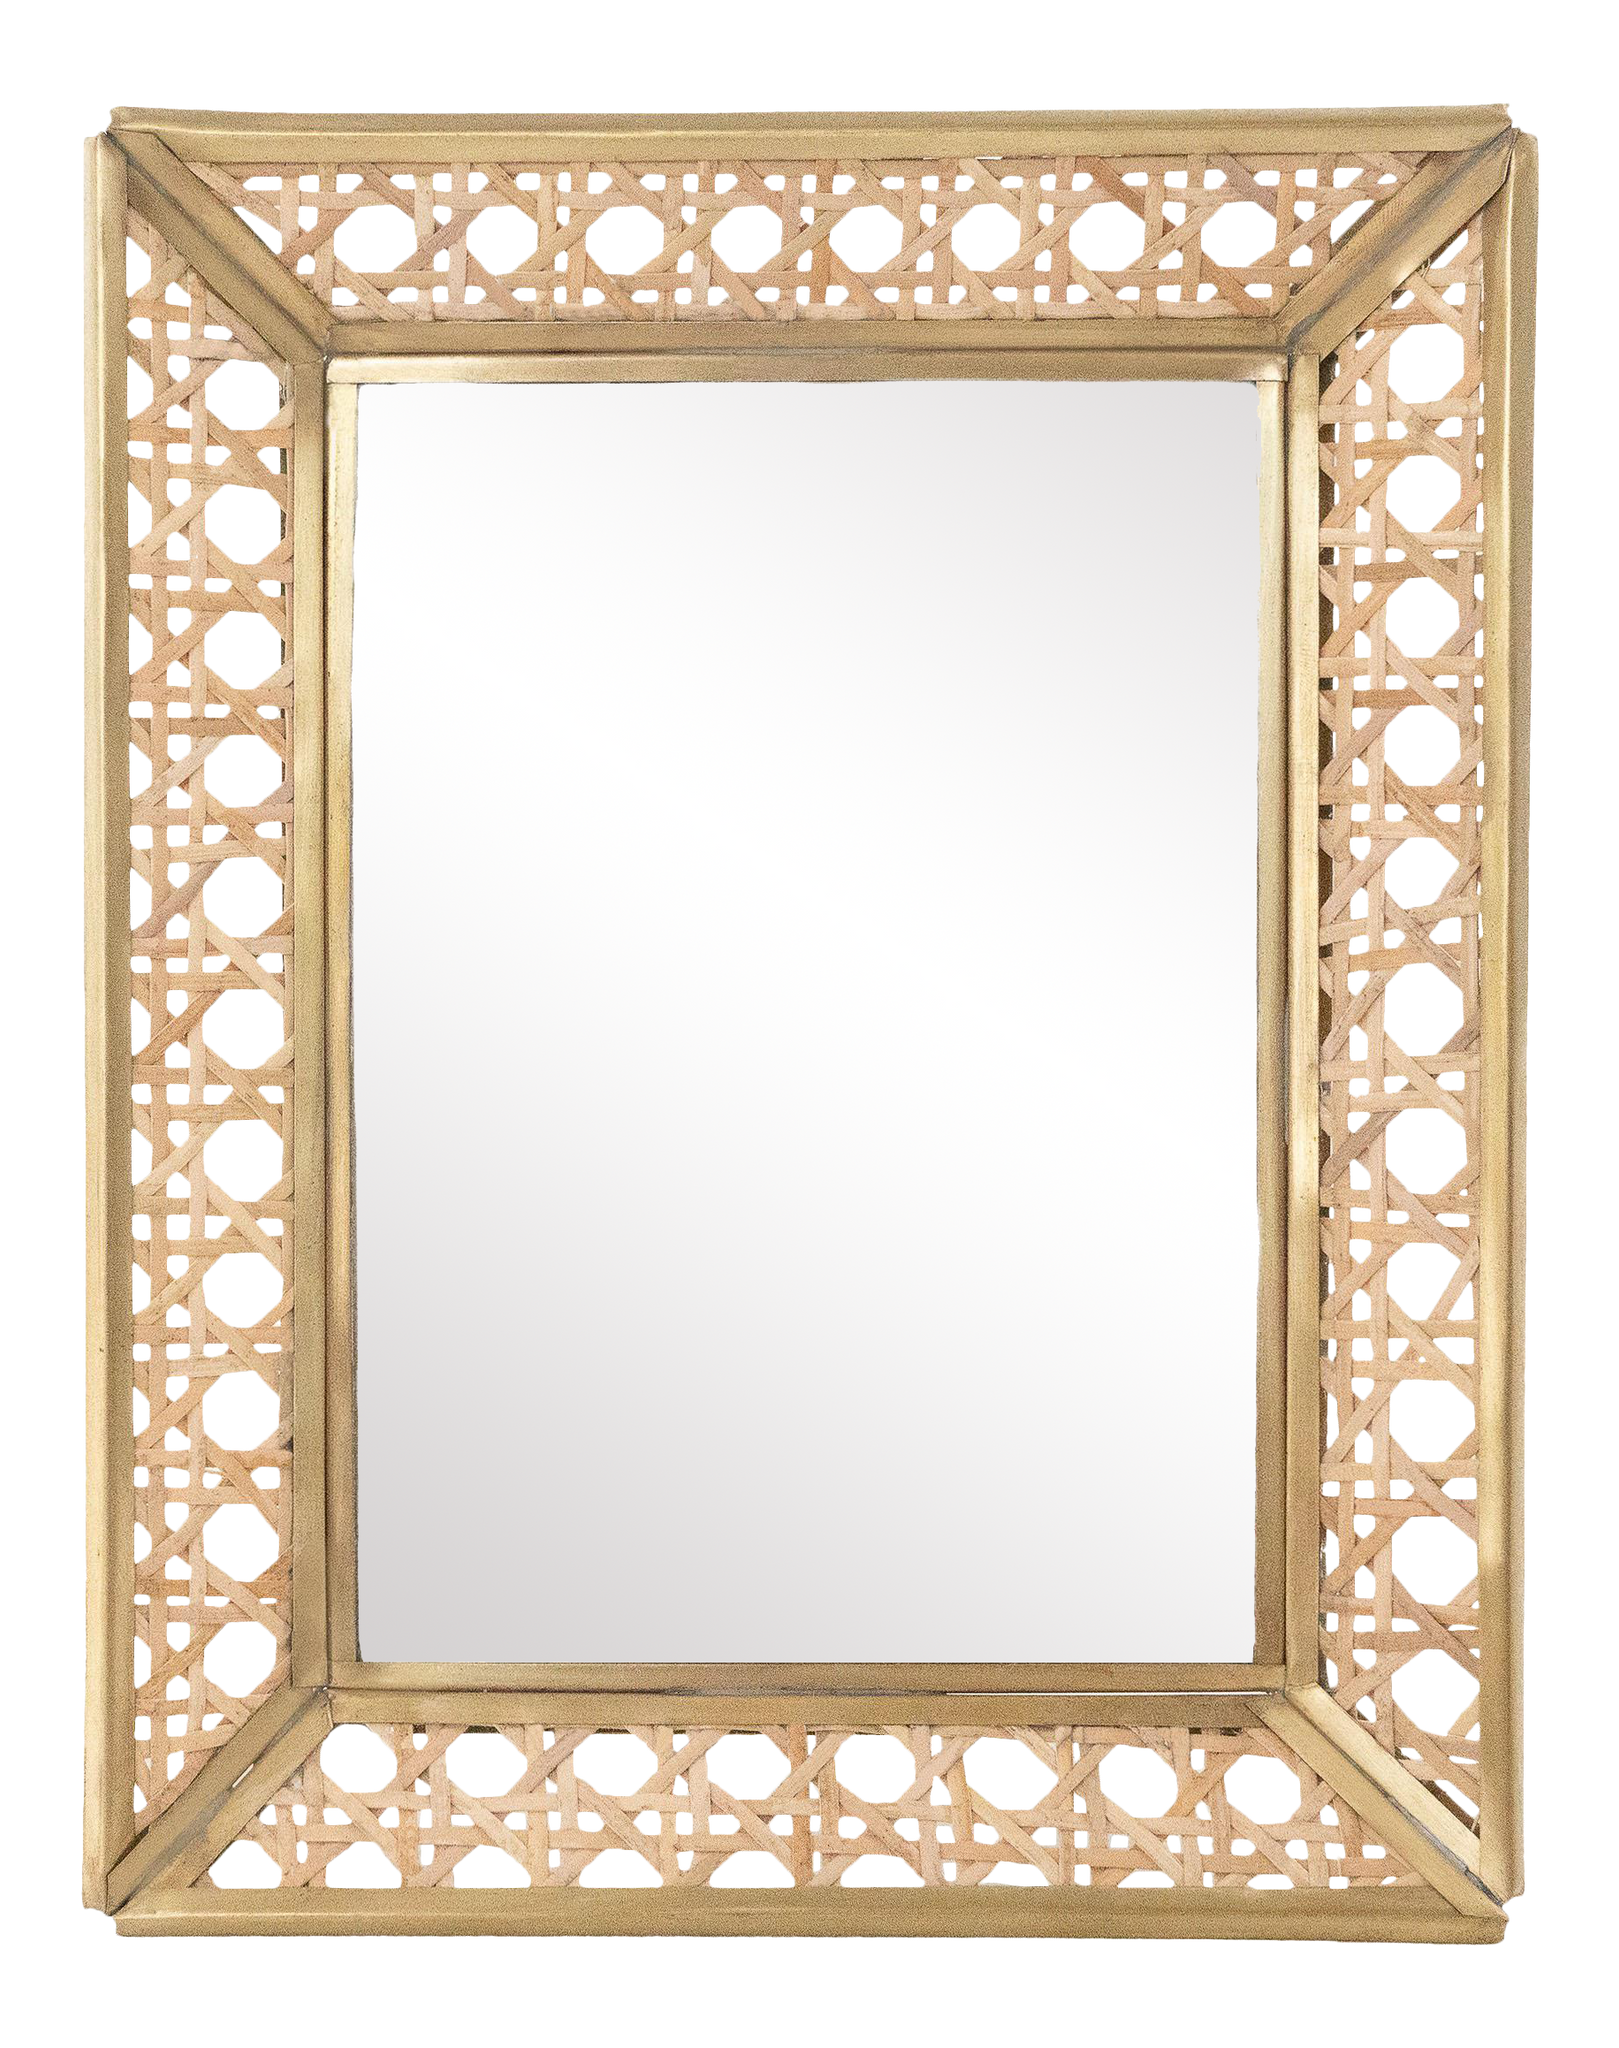 Natural Cane Wicker Picture Frame